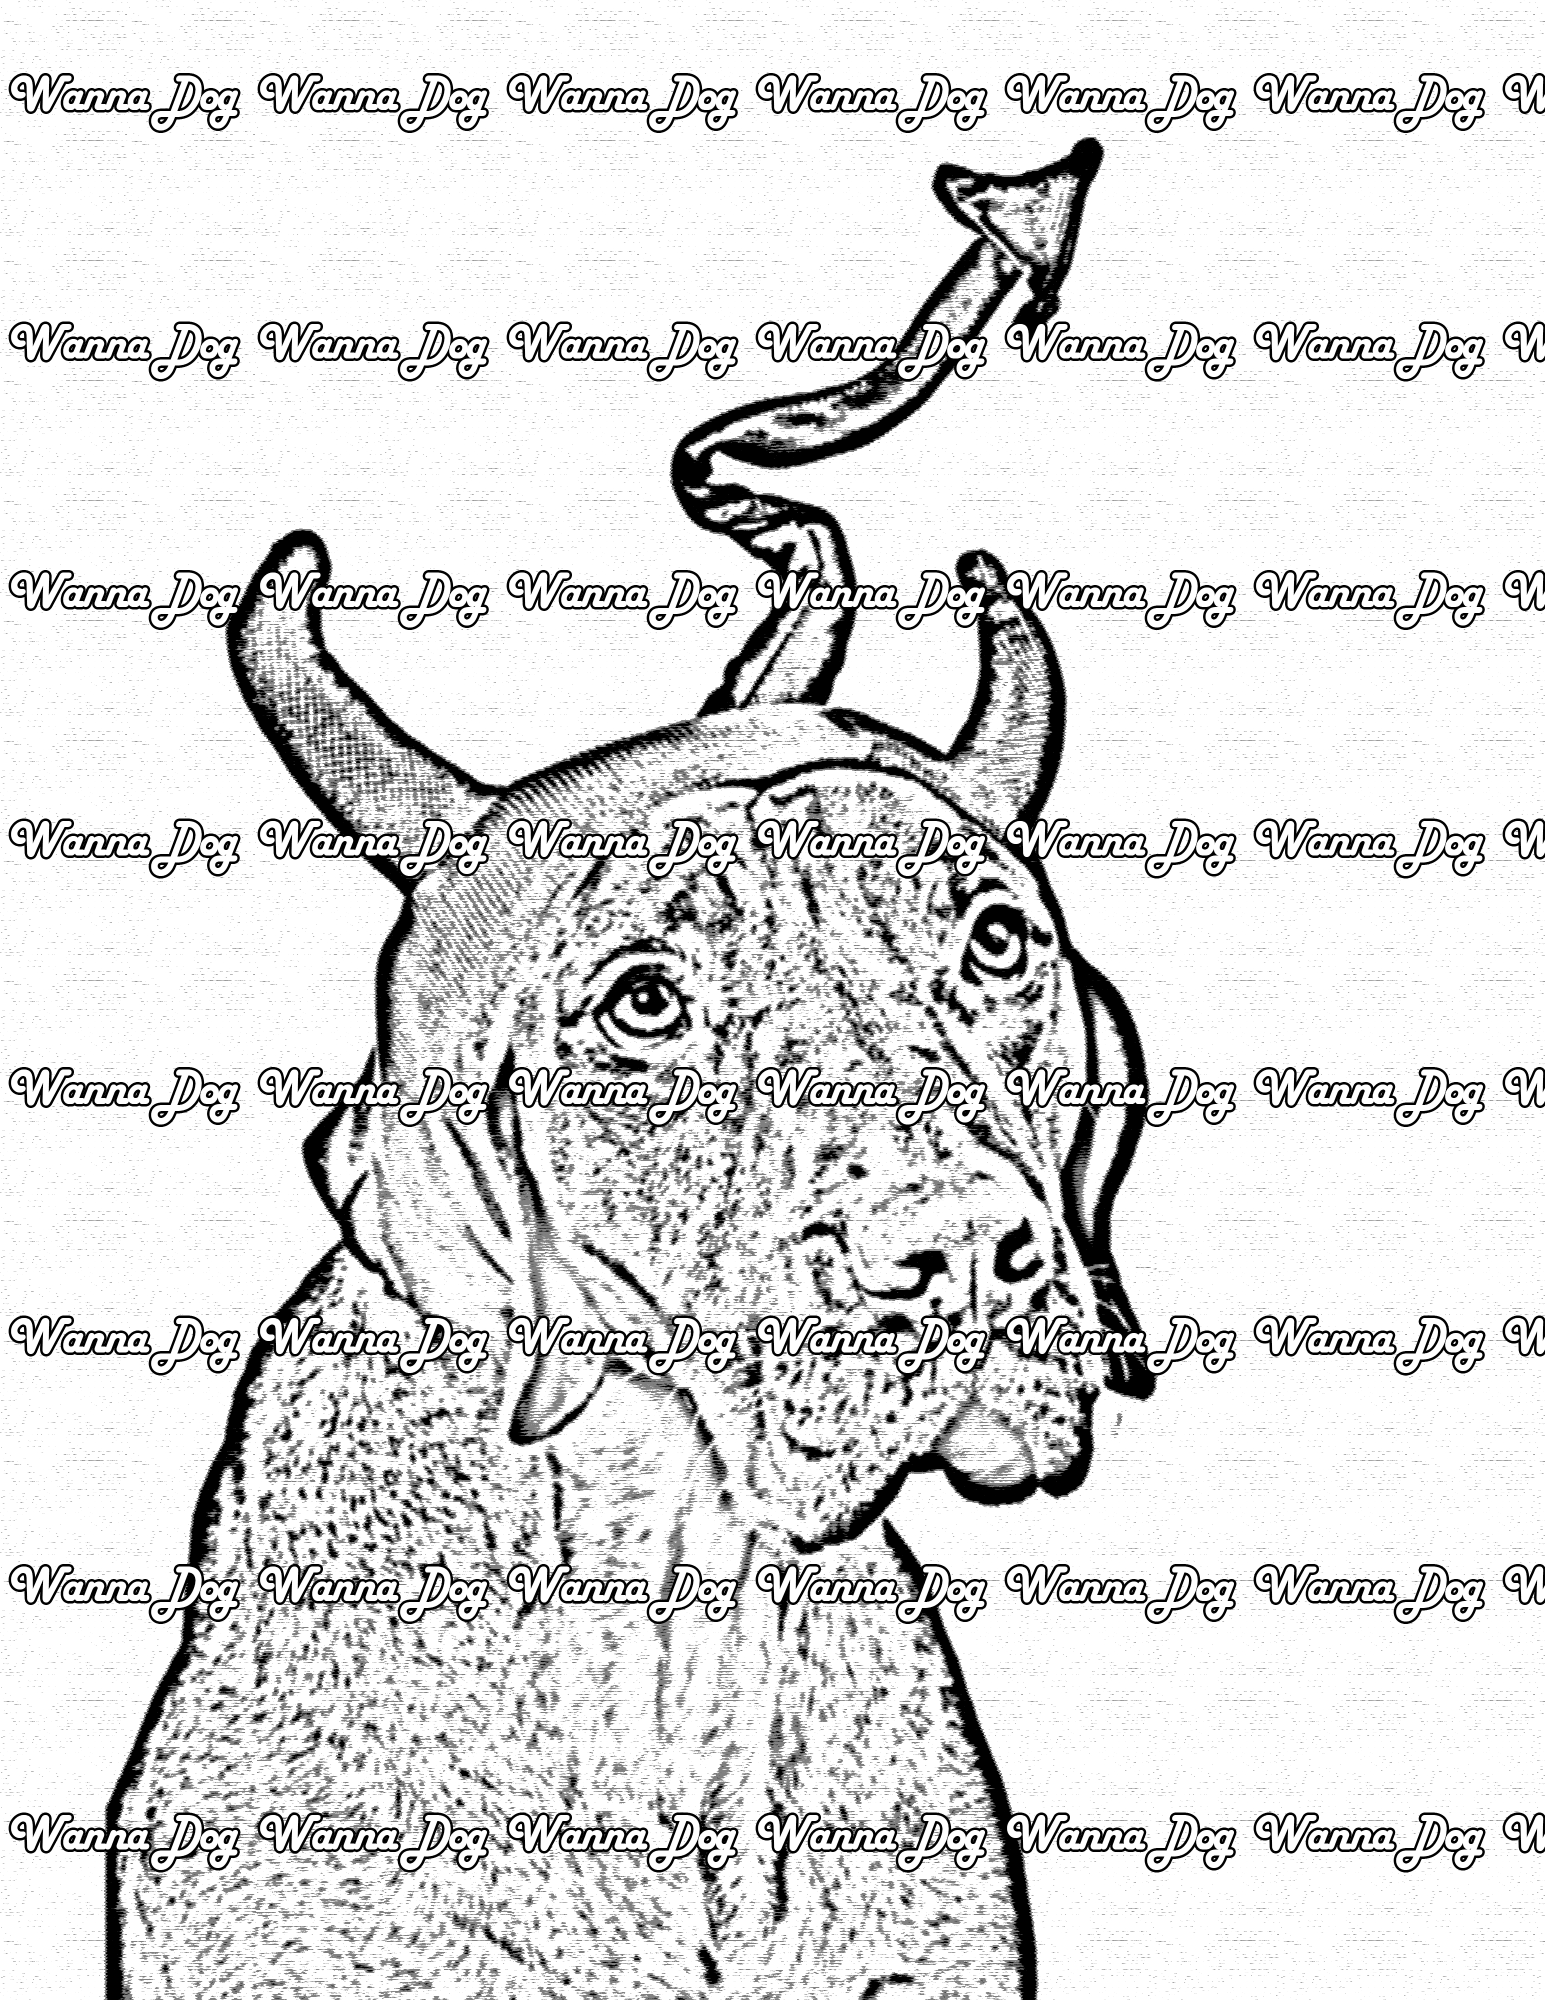 Halloween Dog Coloring Page of a dog in a devil costume